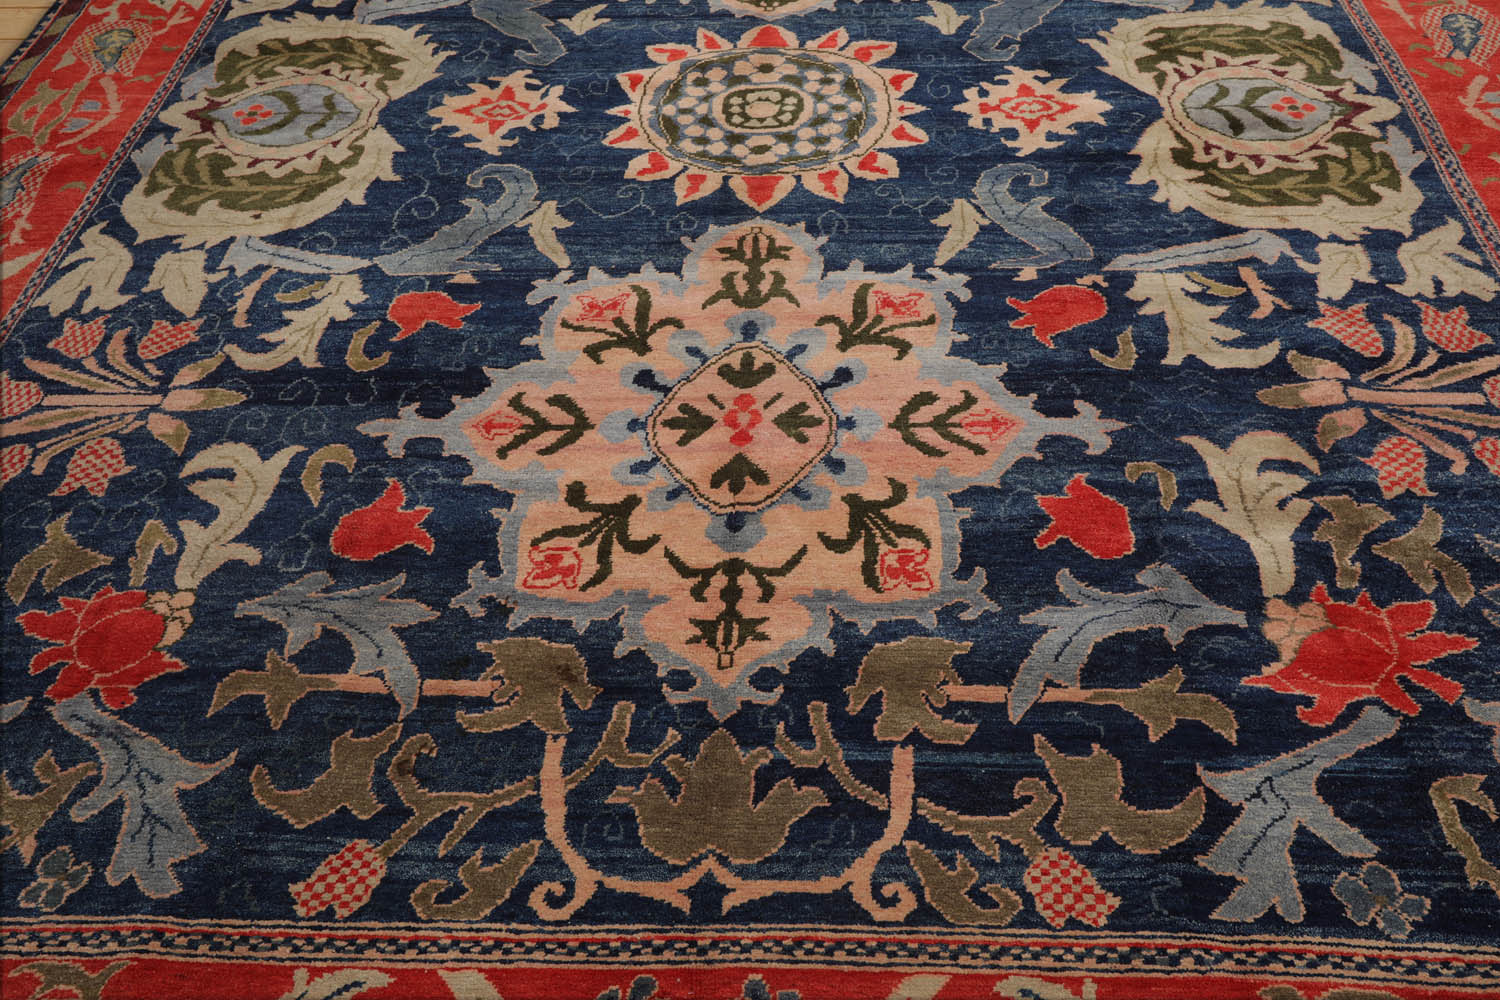 Gaila 10x14 Hand Knotted 100% Wool Turkish Oushak Arts & Crafts Oriental Area Rug Navy, Coral Color